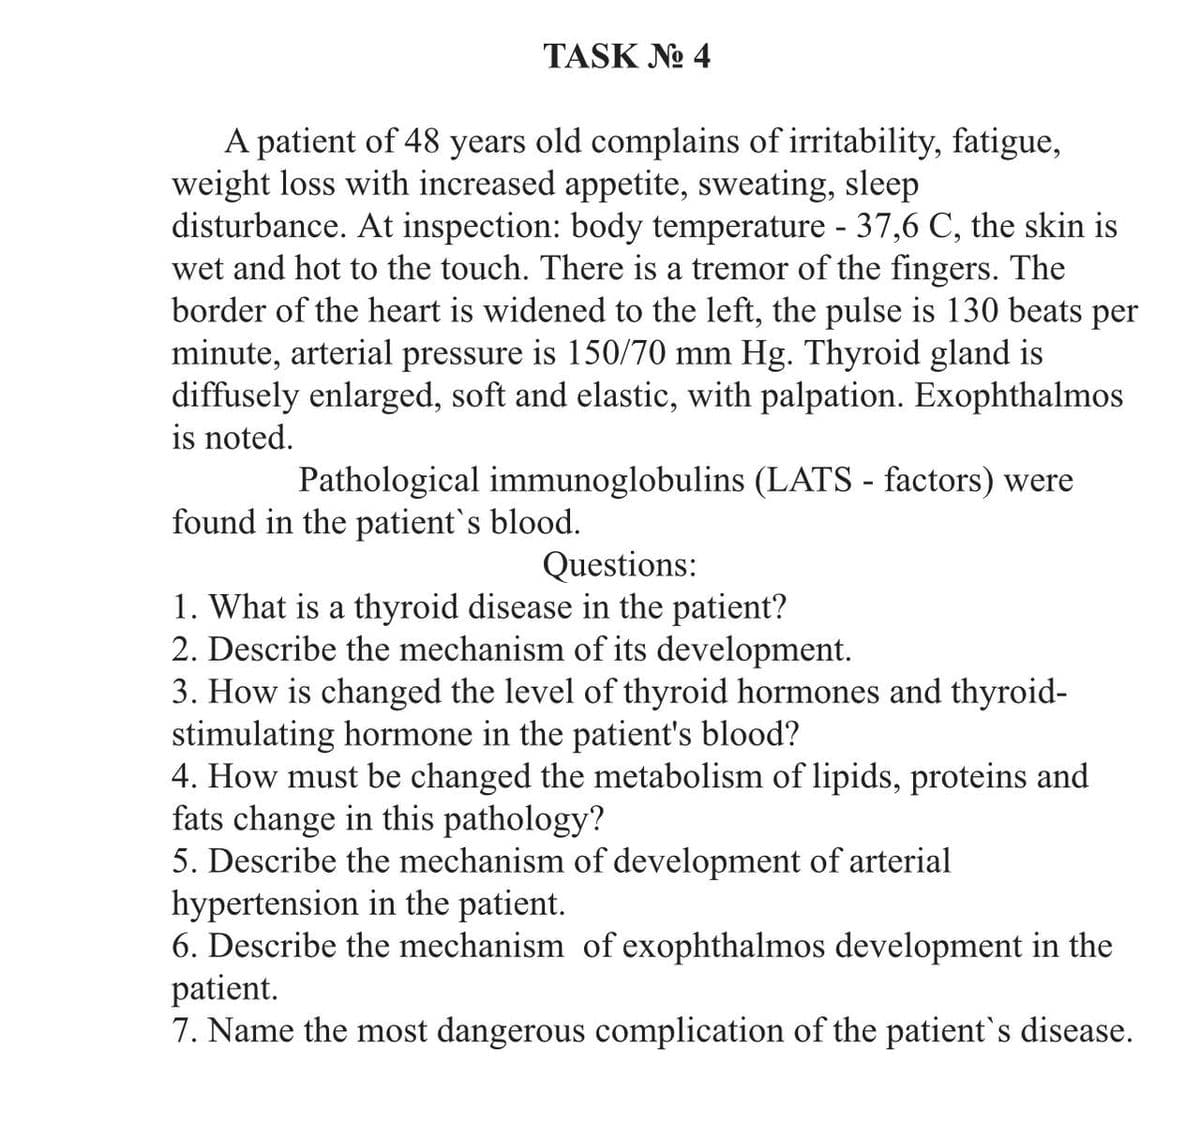 TASK No 4
A patient of 48 years old complains of irritability, fatigue,
weight loss with increased appetite, sweating, sleep
disturbance. At inspection: body temperature - 37,6 C, the skin is
wet and hot to the touch. There is a tremor of the fingers. The
border of the heart is widened to the left, the pulse is 130 beats per
minute, arterial pressure is 150/70 mm Hg. Thyroid gland is
diffusely enlarged, soft and elastic, with palpation. Exophthalmos
is noted.
Pathological immunoglobulins (LATS - factors) were
found in the patient's blood.
Questions:
1. What is a thyroid disease in the patient?
2. Describe the mechanism of its development.
3. How is changed the level of thyroid hormones and thyroid-
stimulating hormone in the patient's blood?
4. How must be changed the metabolism of lipids, proteins and
fats change in this pathology?
5. Describe the mechanism of development of arterial
hypertension in the patient.
6. Describe the mechanism of exophthalmos development in the
patient.
7. Name the most dangerous complication of the patient's disease.